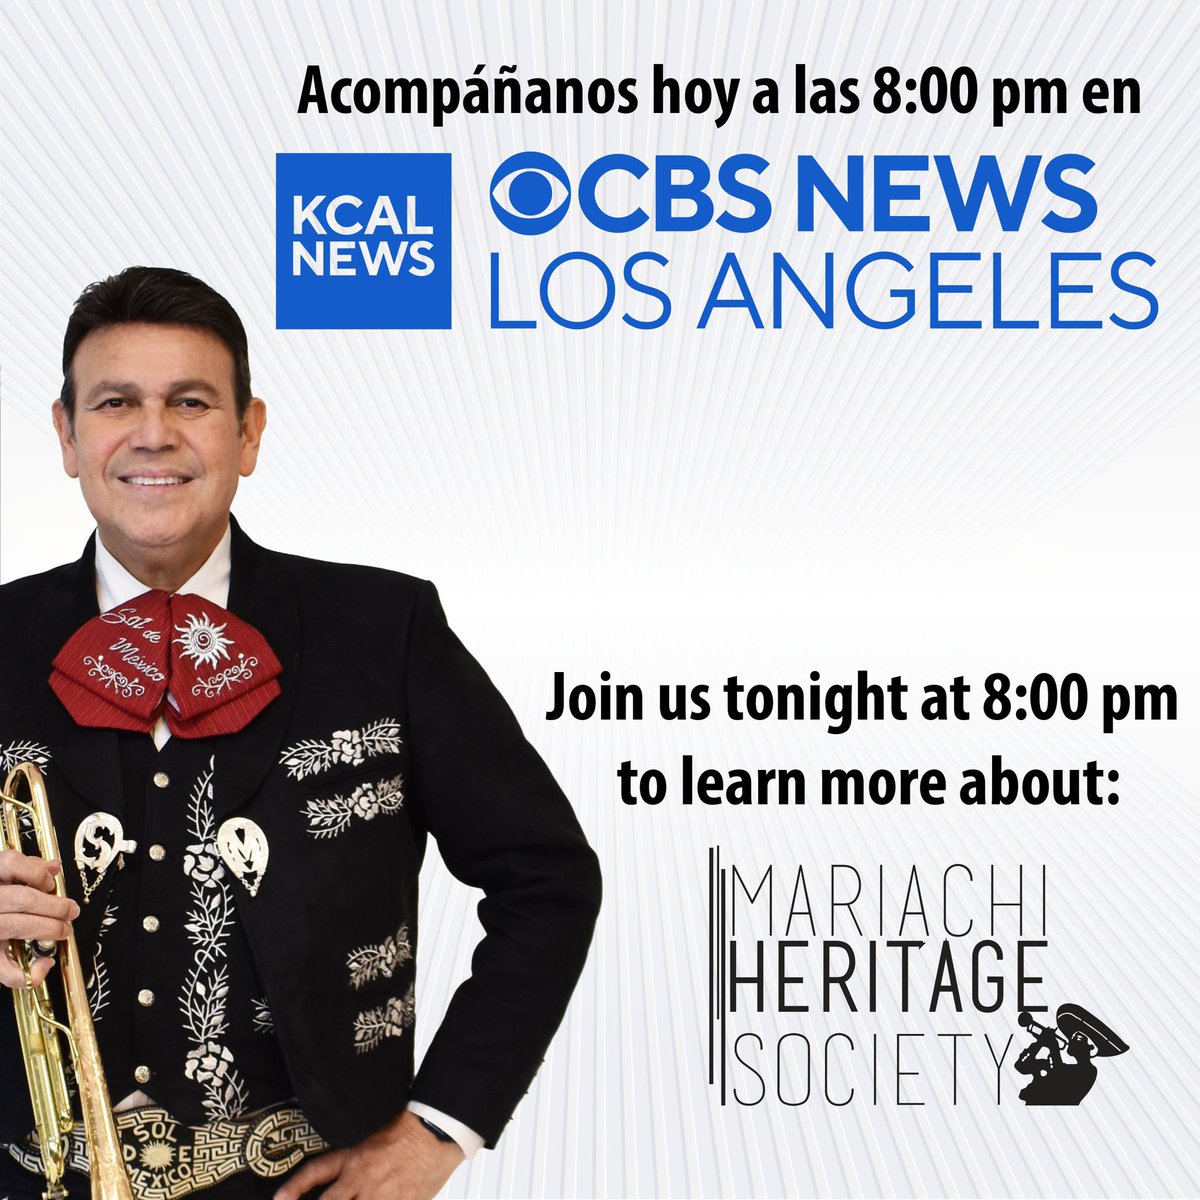 Join us tonight on @kcalnews at 8:00pm (PST) for a feature on the Mariachi Heritage Society! Muchas gracias @luzdelia_c ! #mariachiheritagesociety #kcalnews #mariachisoldemexicodejosehernandez #mariachireynadelosangeles